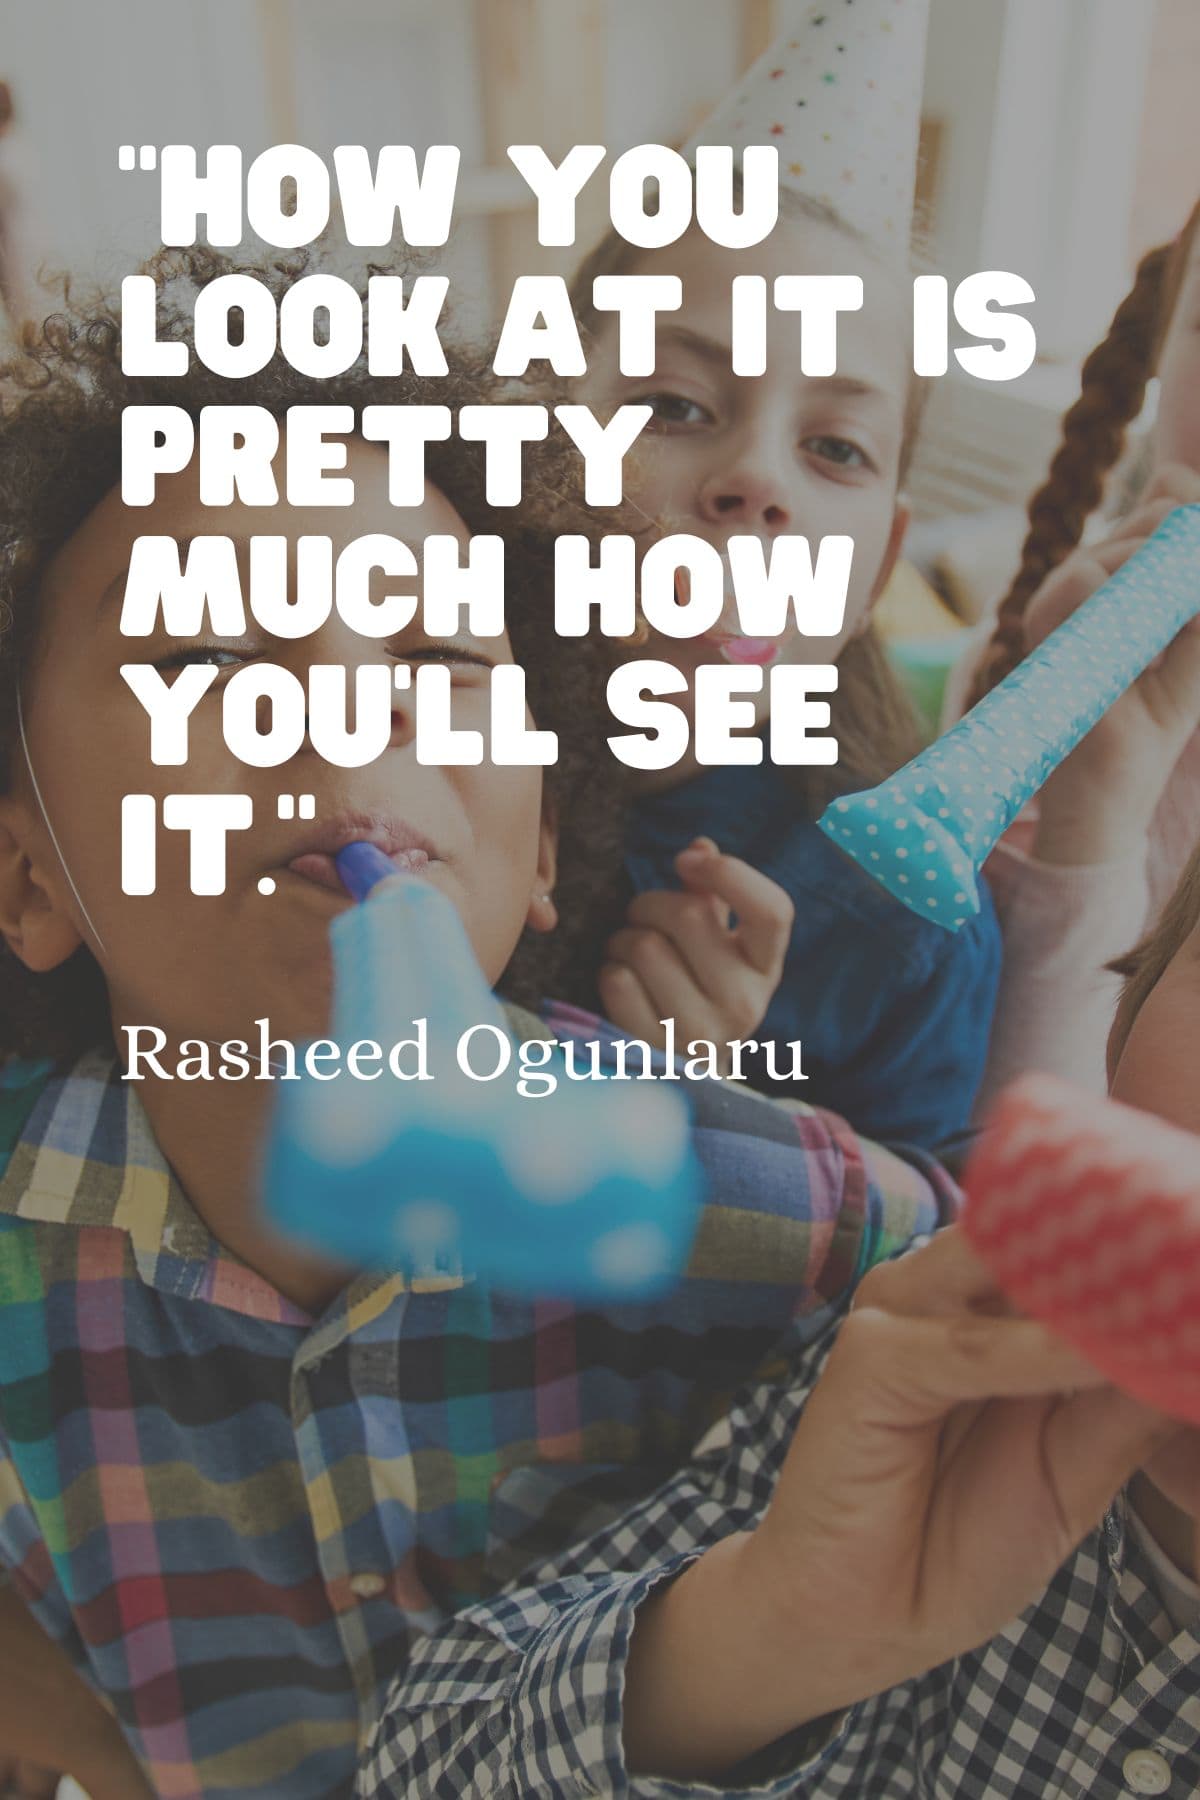 “How you look at it is pretty much how you’ll see it.” – Rasheed Ogunlaru A quote about mindfulness for kids